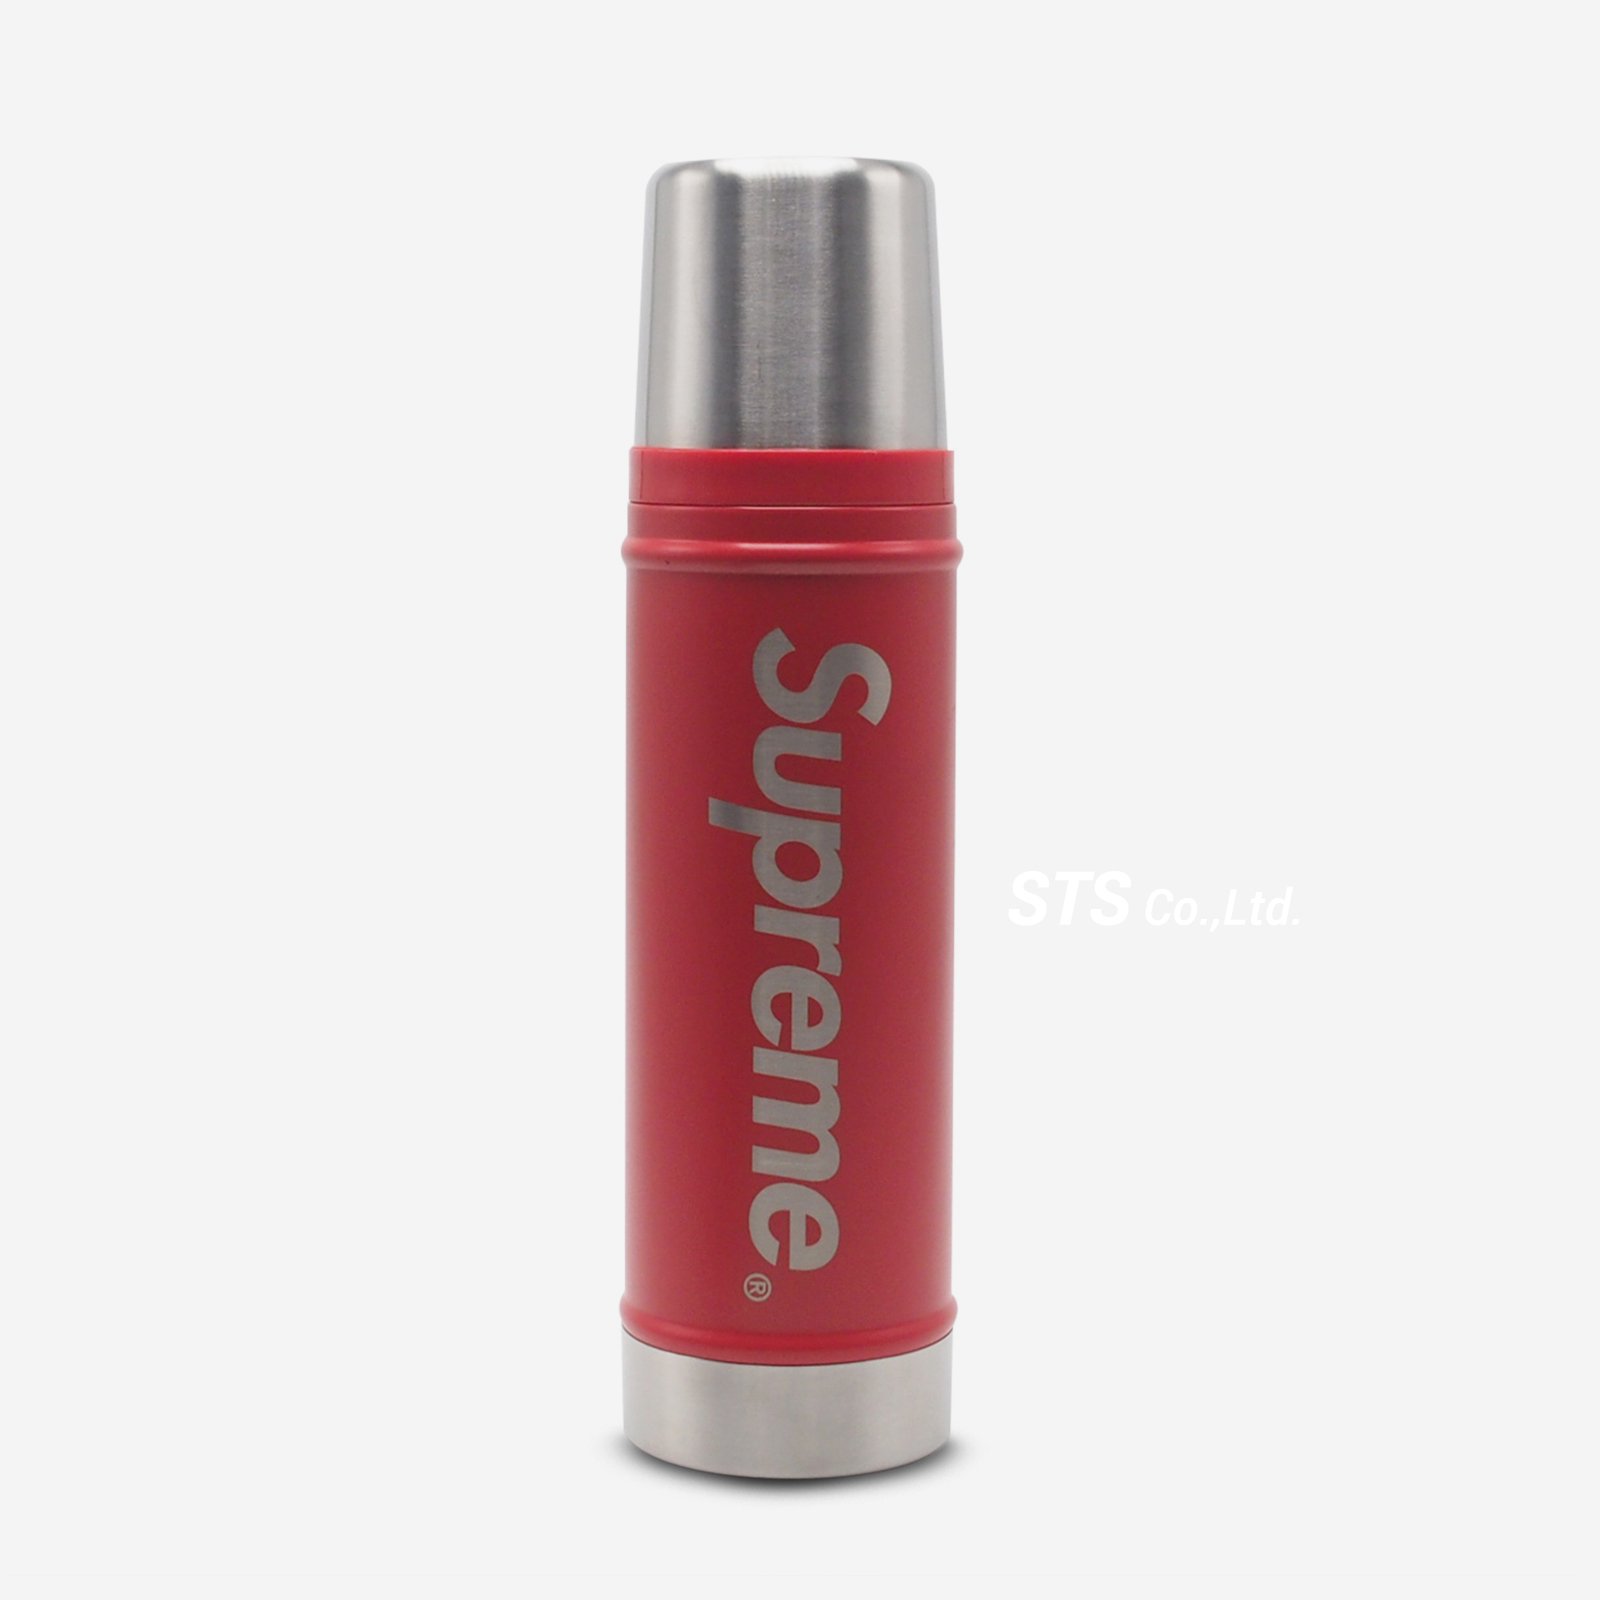 Supreme®/Stanley®Vacuum Insulated Bottle